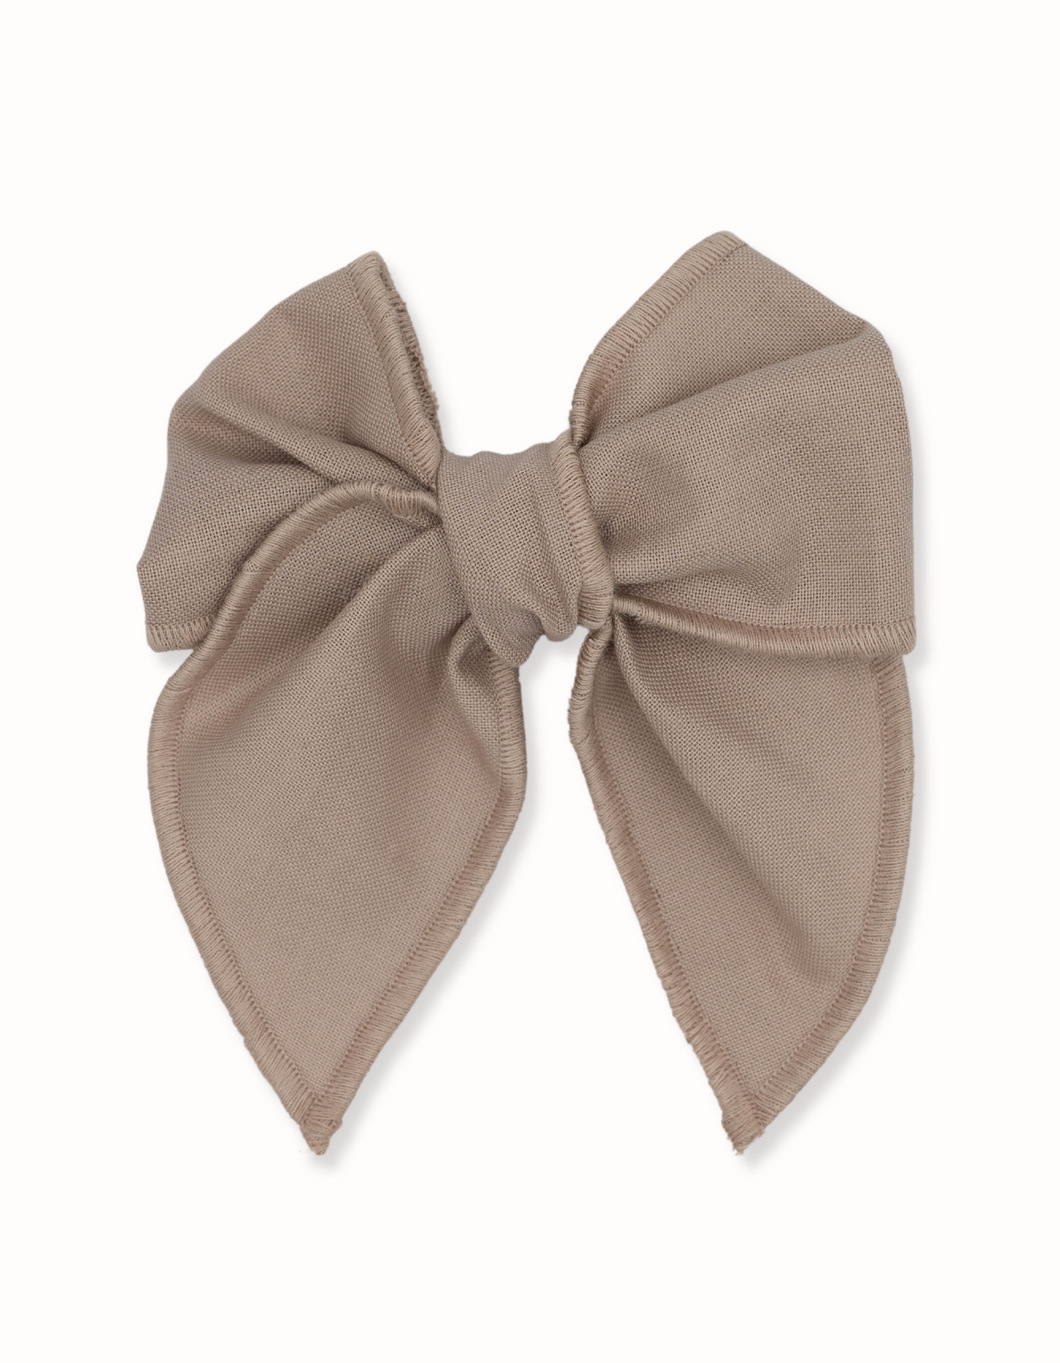 Livy Lou Collection, Nora Fable Bow in 100% organic cotton in light taupe, perfect for daily wear and party wear.